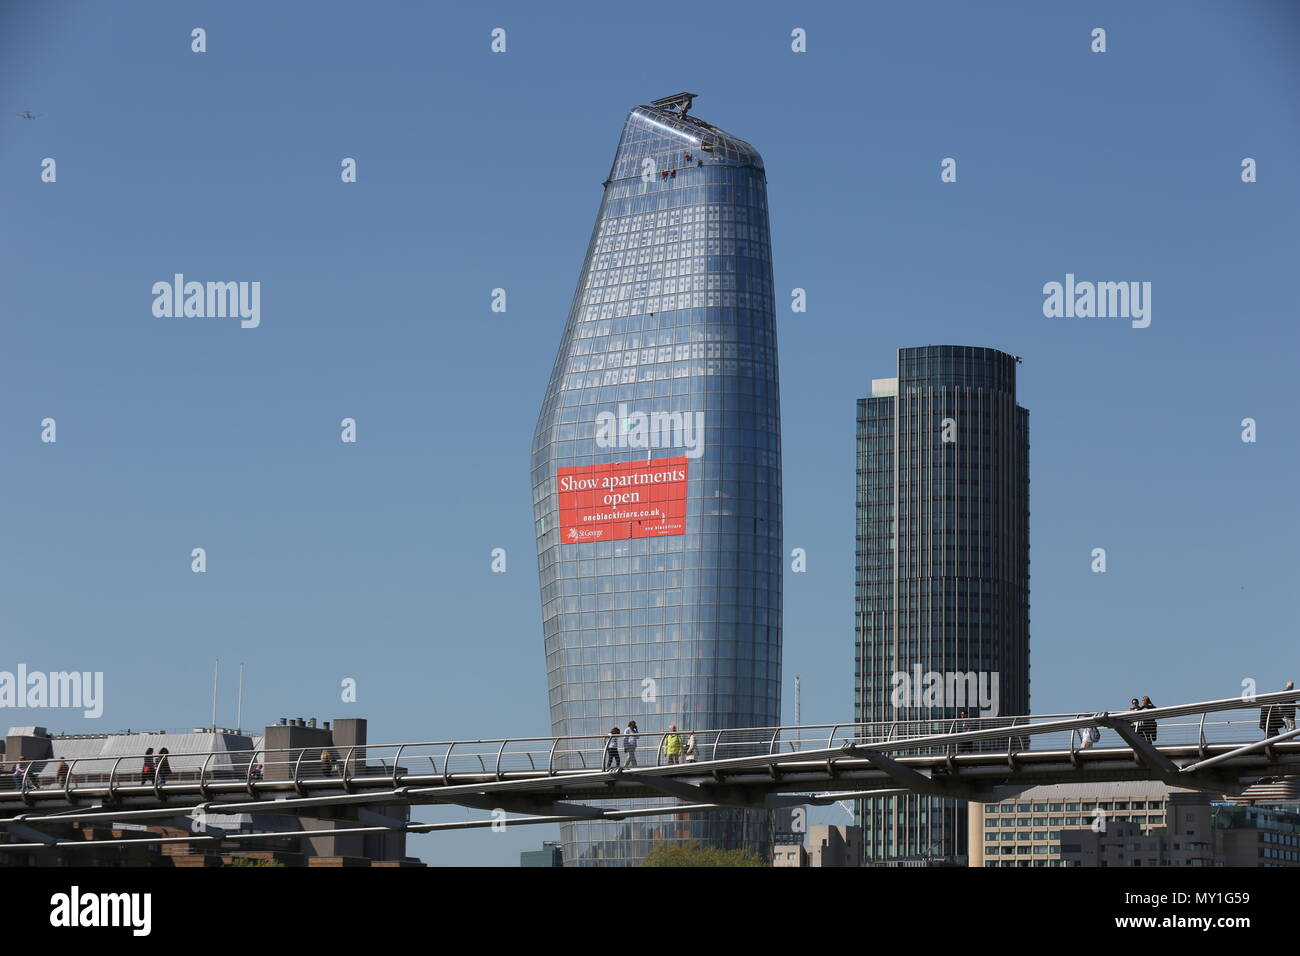 London - May 4, 2018. One Blackfriars, a 52-storey development of 170 m height, built by St. George South London Limited, No. 1 Blackfriars Stock Photo